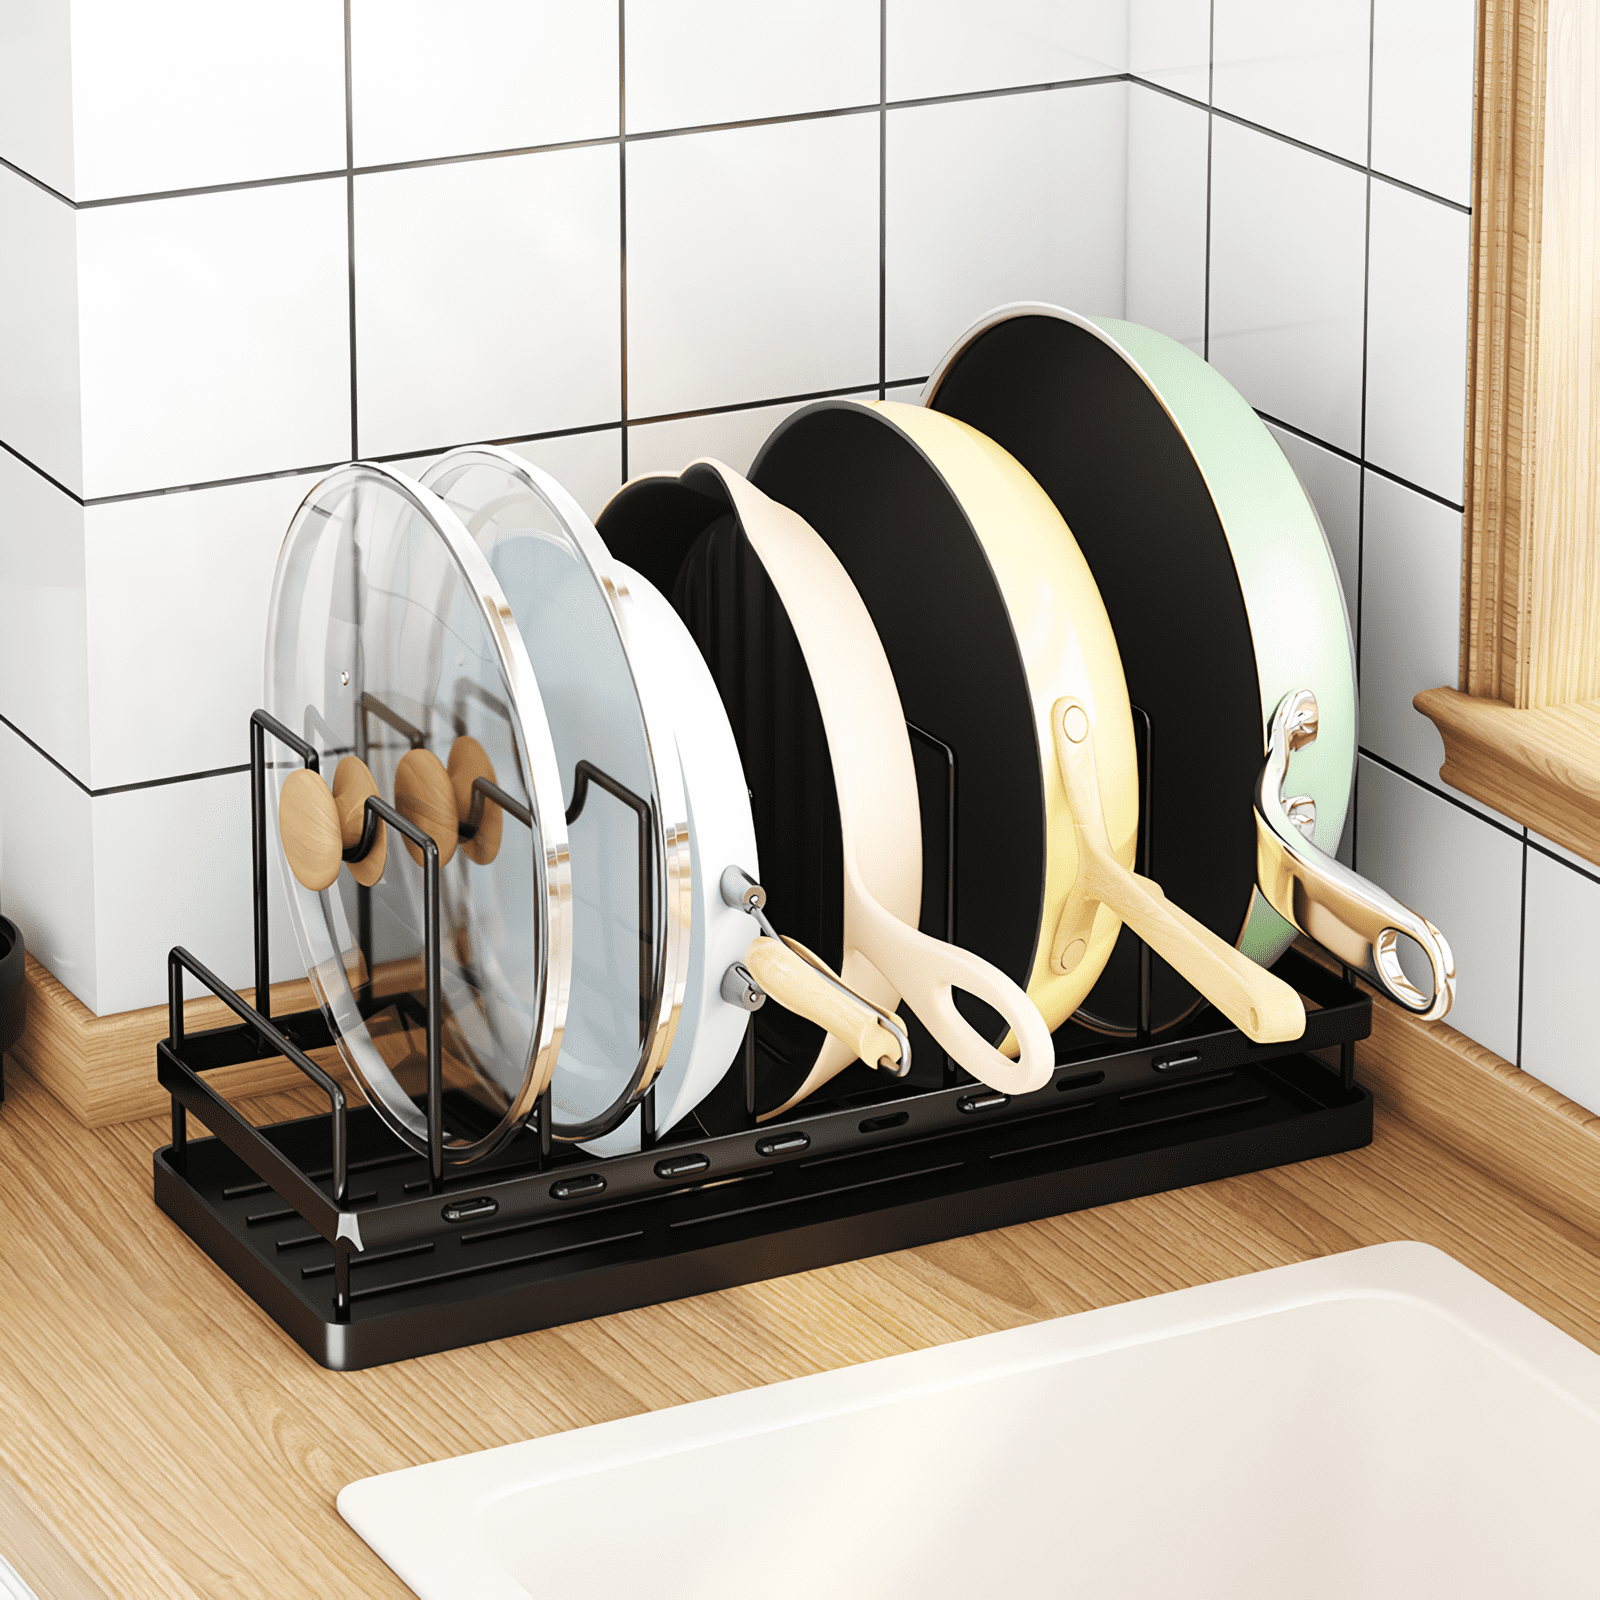  TQVAI Stainless Steel Dish Drying Rack with Drainboard, Rod and  Sponge Hook Holder, Hanging Dish Drainer, Over The Sink Dish Rack - Silver:  Home & Kitchen